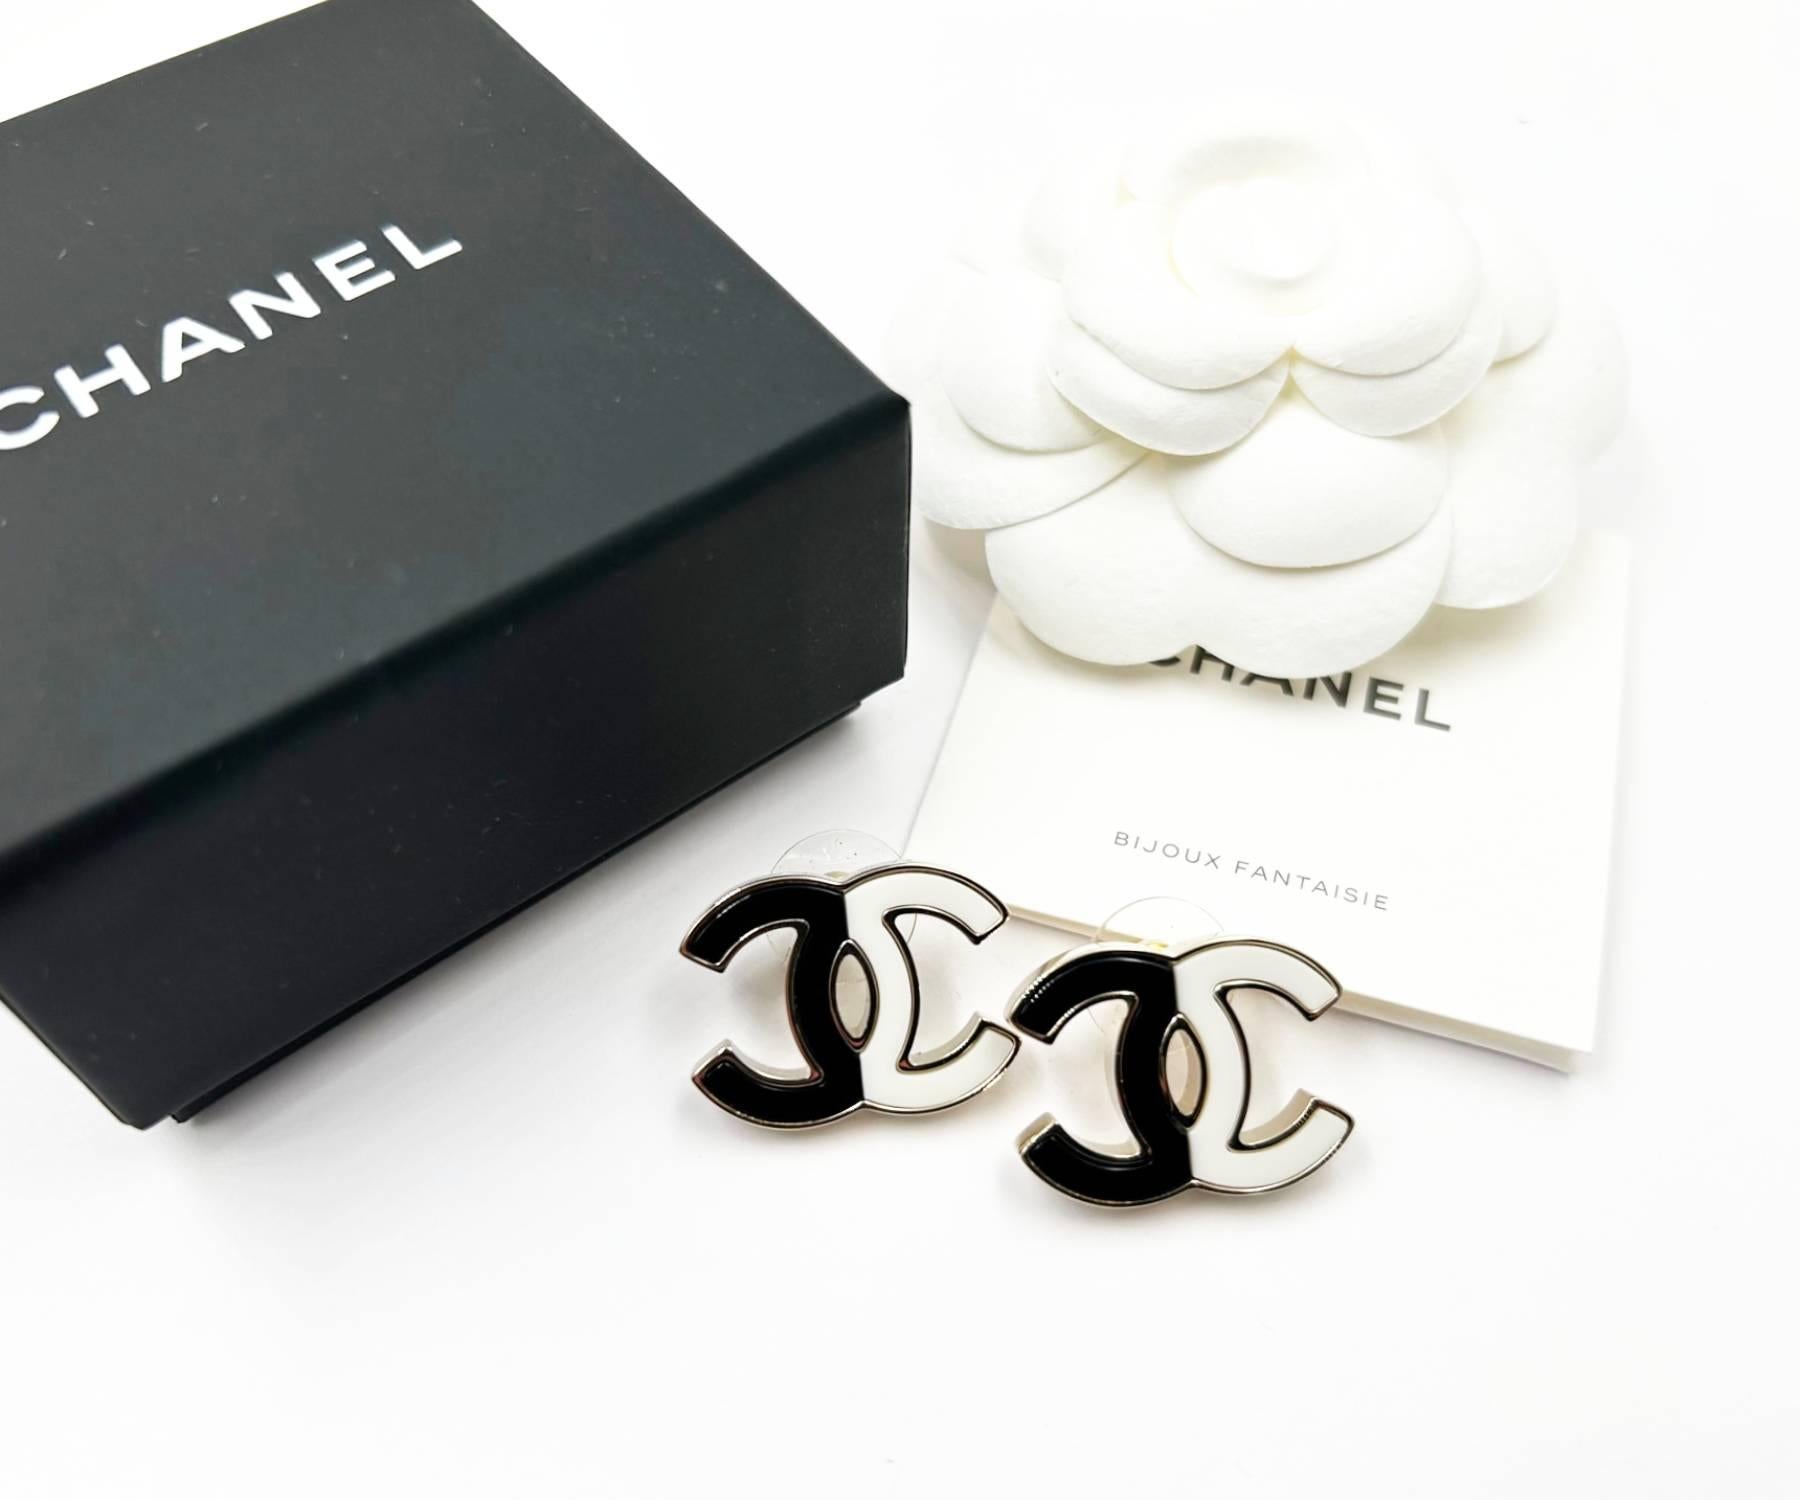 Chanel Gold CC Black White Half Half Piercing Earrings

*Marked 23
*Made in Italy
*Comes with the original box, pouch and booklet

-It is approximately 1